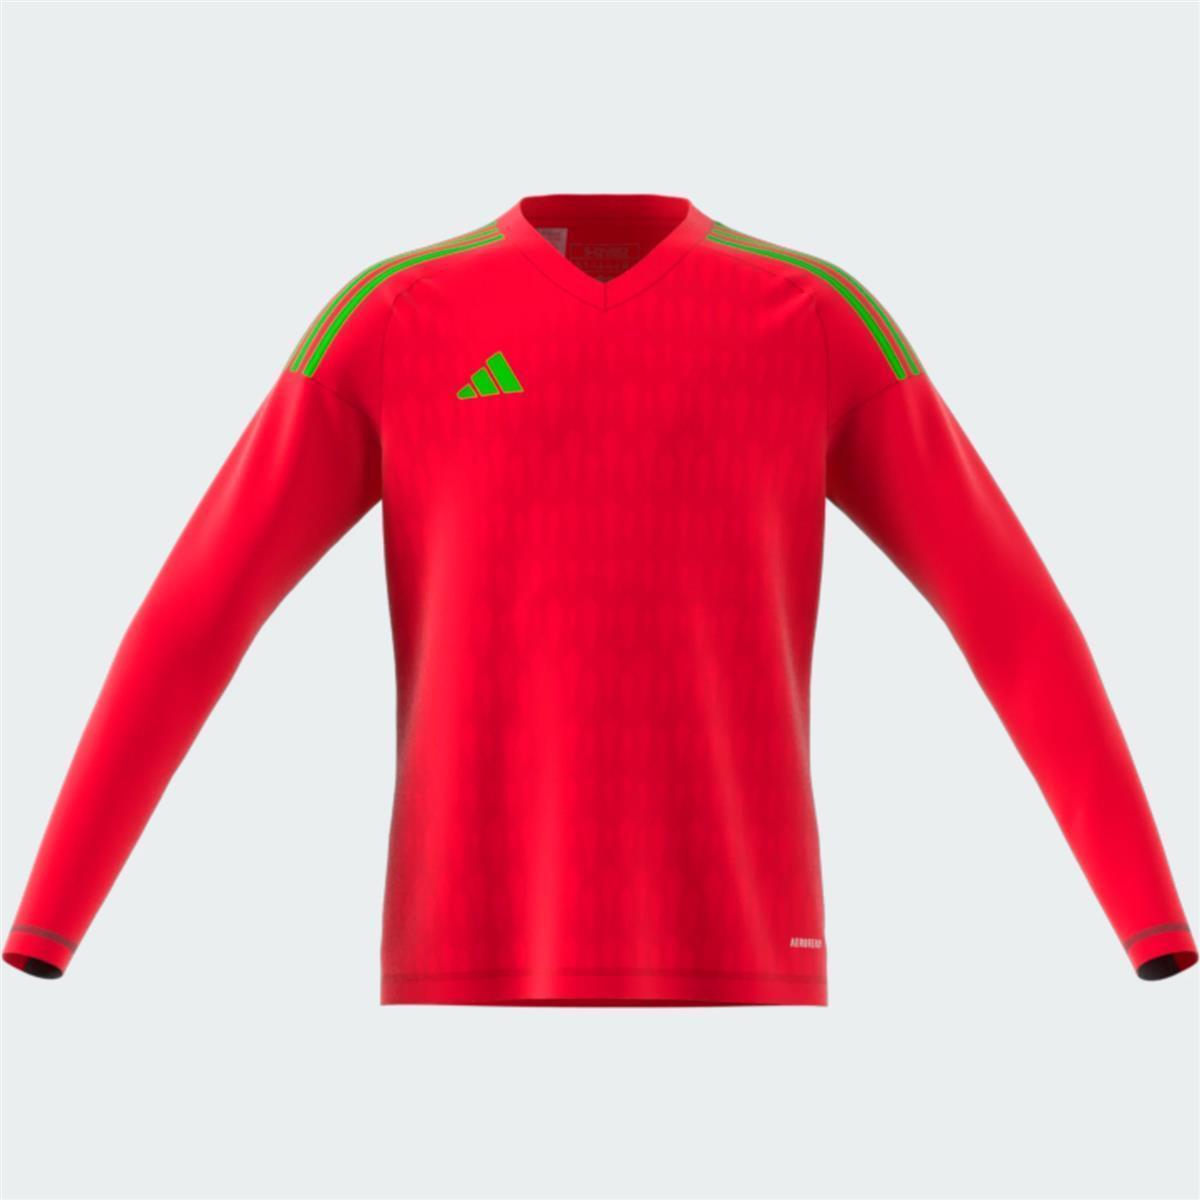 ADIDAS T23 COMPETITION GK JERSEY LS YOUTH TEAM CORE RED